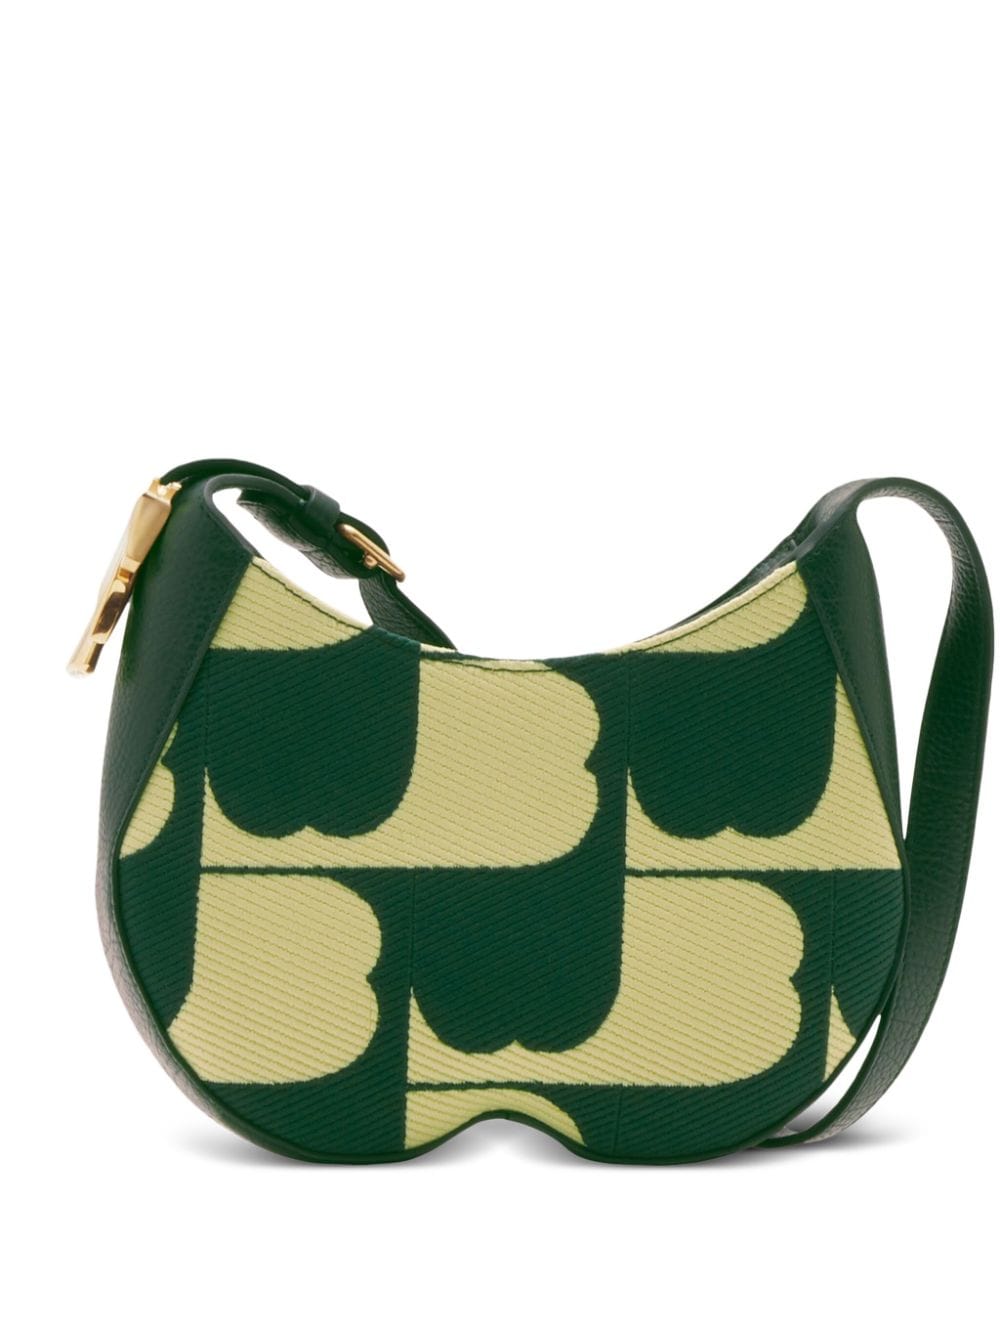 Burberry small Chess leather shoulder bag - Green von Burberry